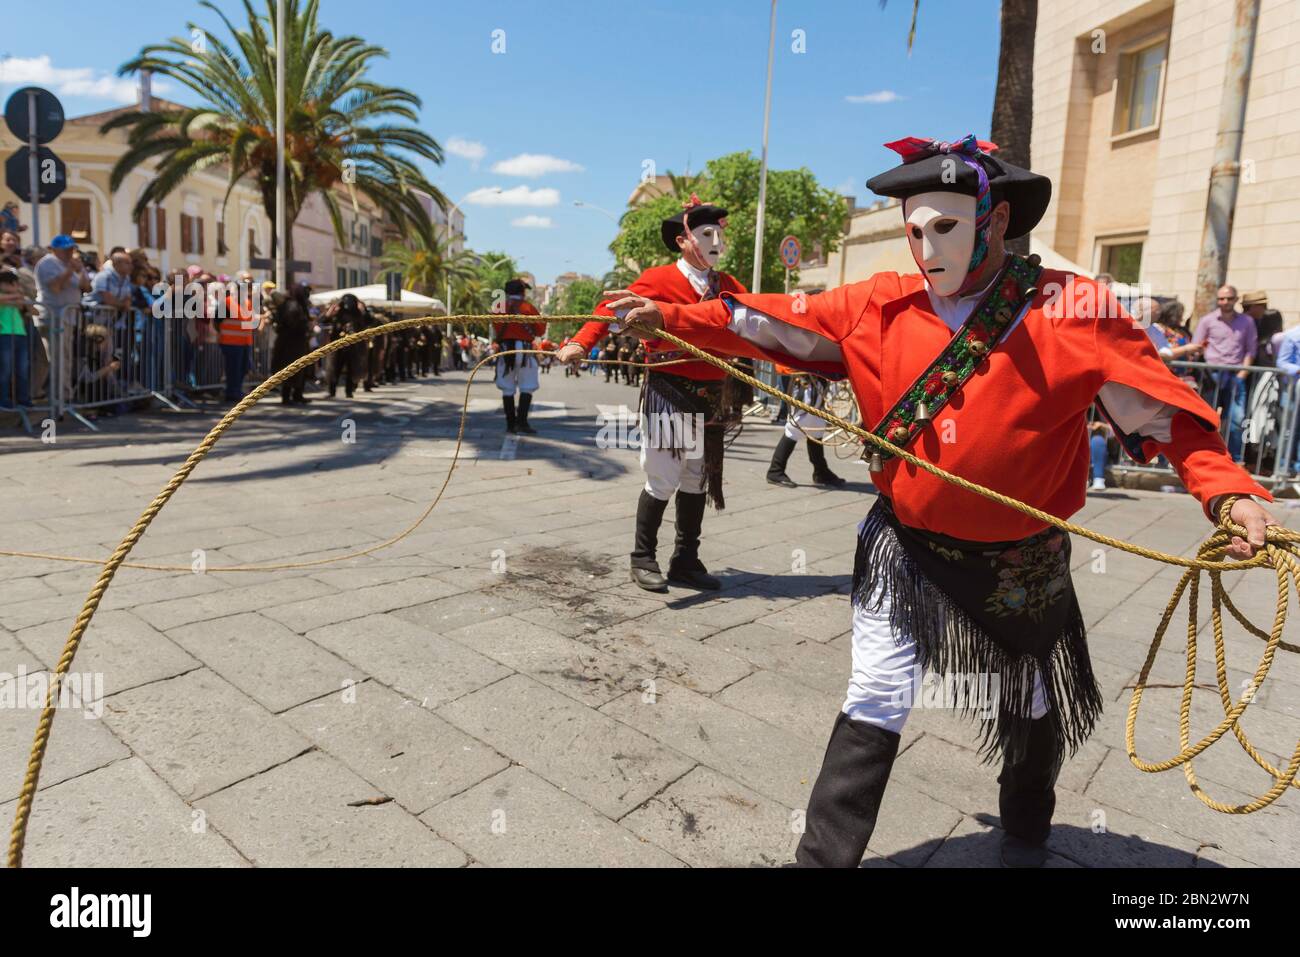 Sardinia festival, a man dressed in the traditional folk dress of a Issohadore prepares to lasso a spectator at the Cavalcata festival in Sassari. Stock Photo